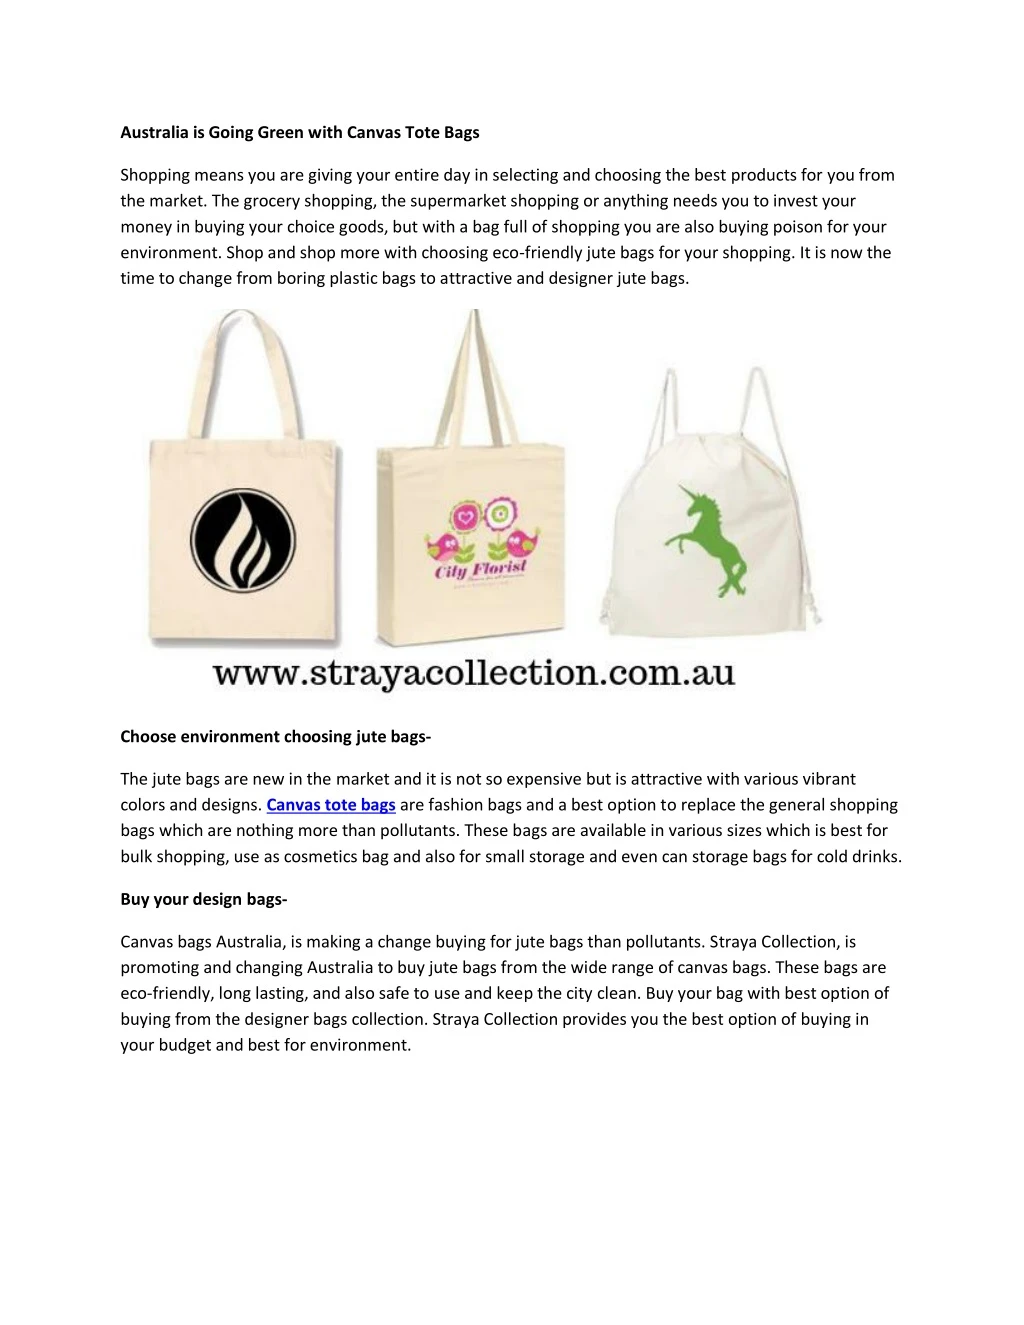 australia is going green with canvas tote bags